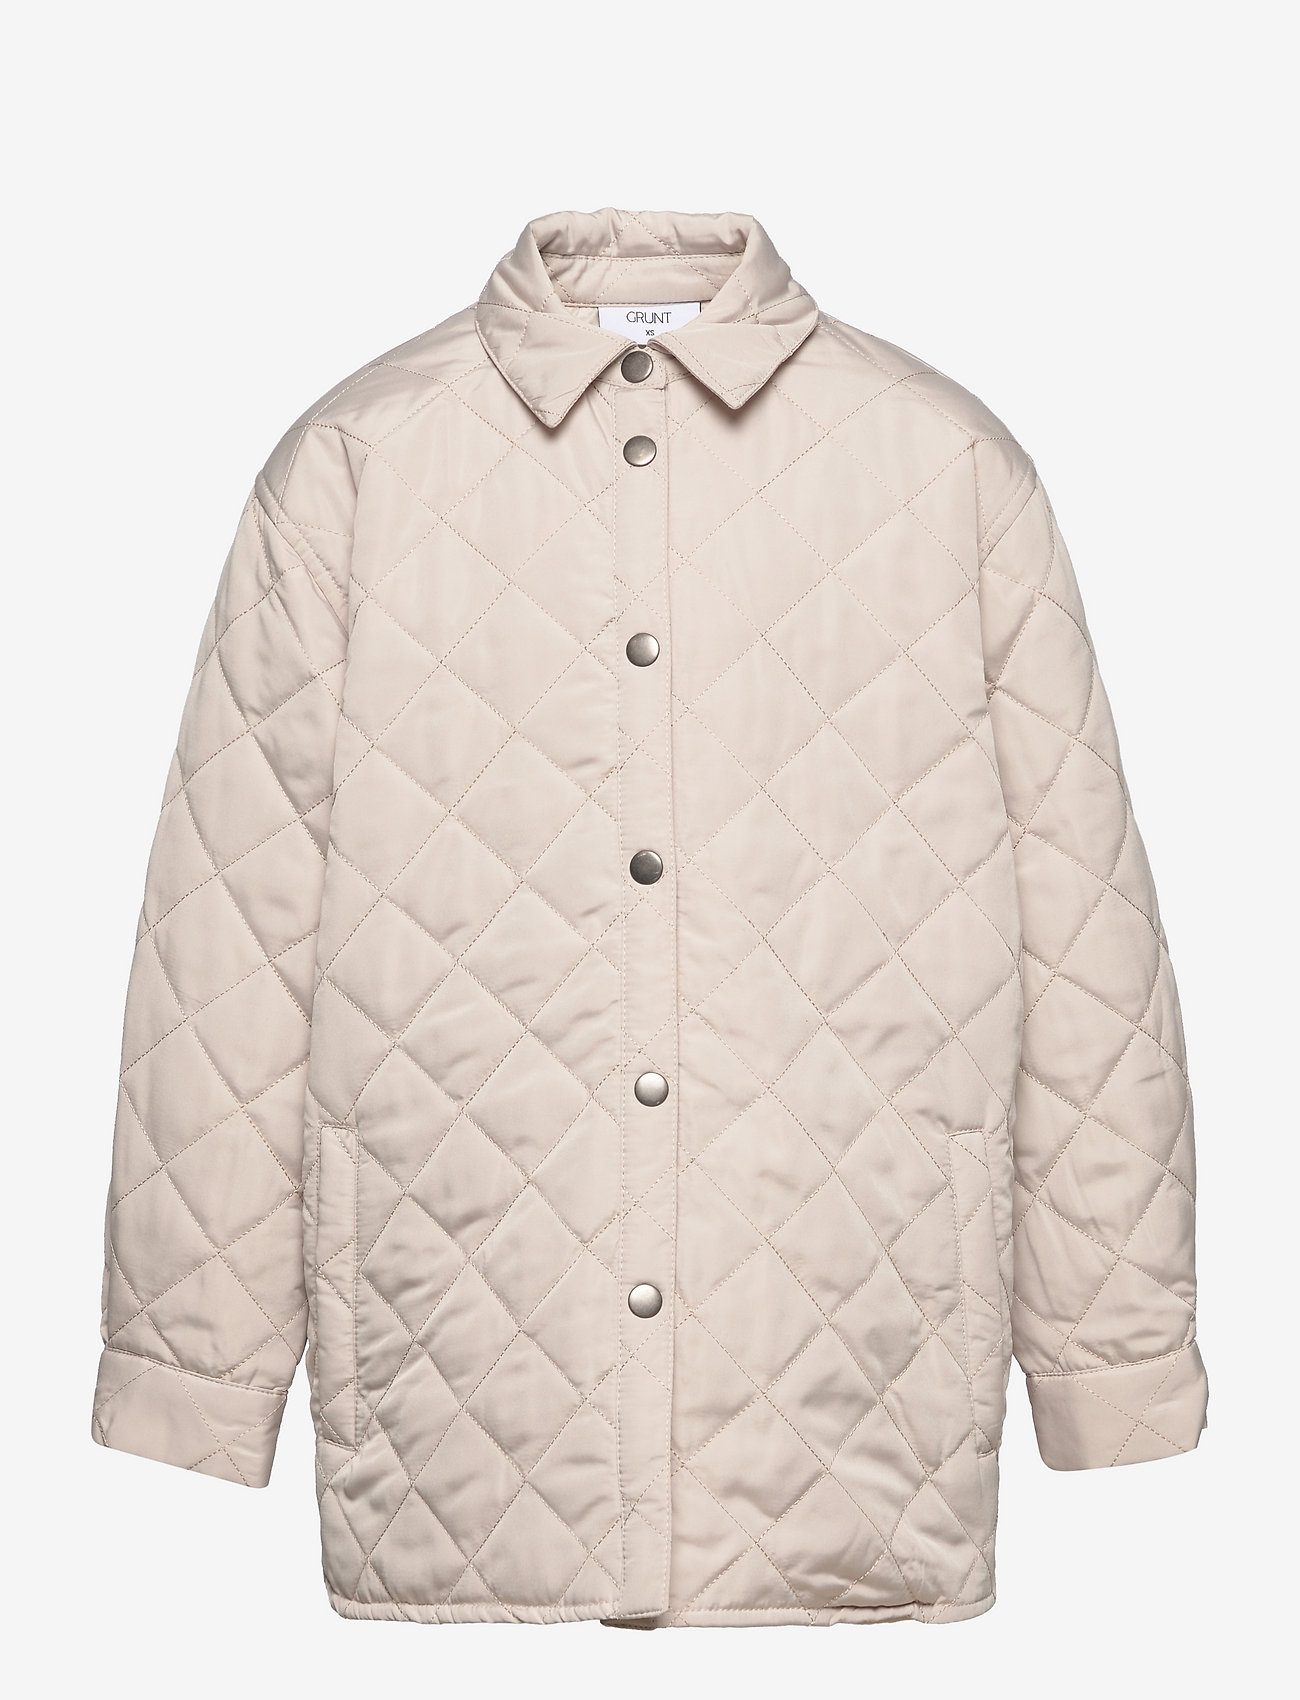 Grunt - Kate Quilt Jacket - quilted jackets - off white - 0